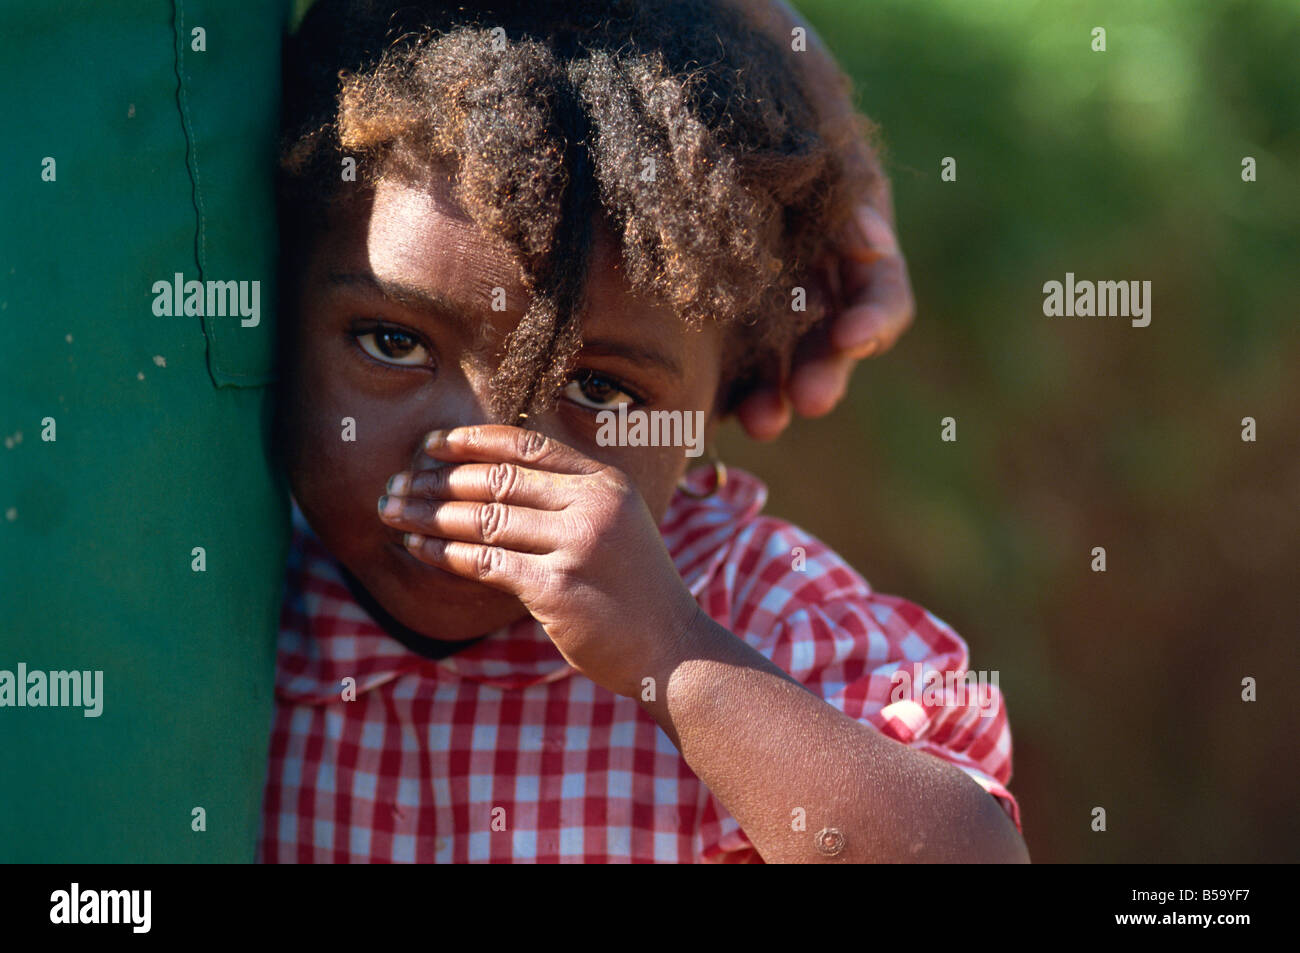 Small child in red check shirt at mother's side, Godet, Haiti, West Indies, Central America Stock Photo